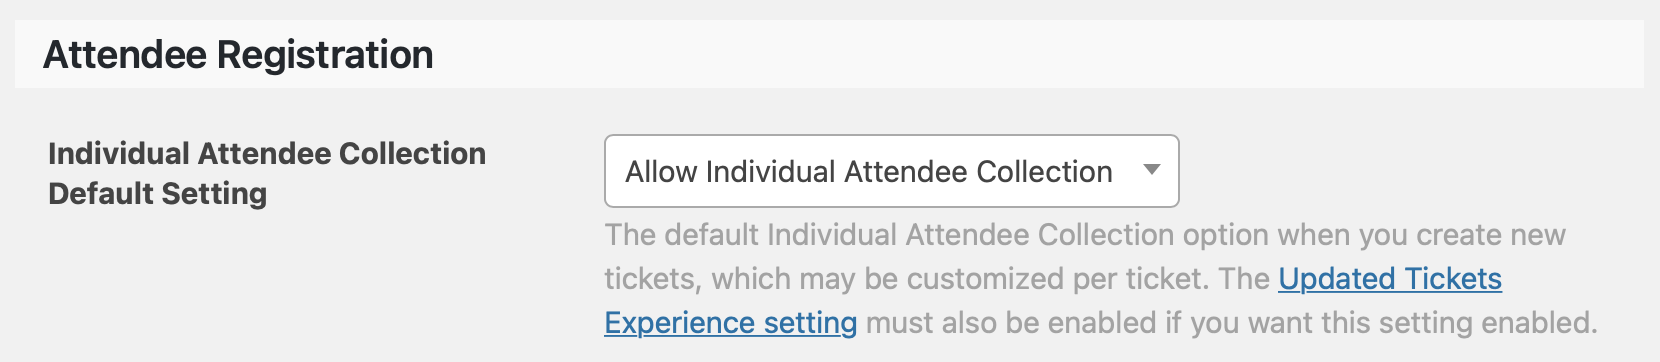 Collecting attendee information with the Attendee Registration option